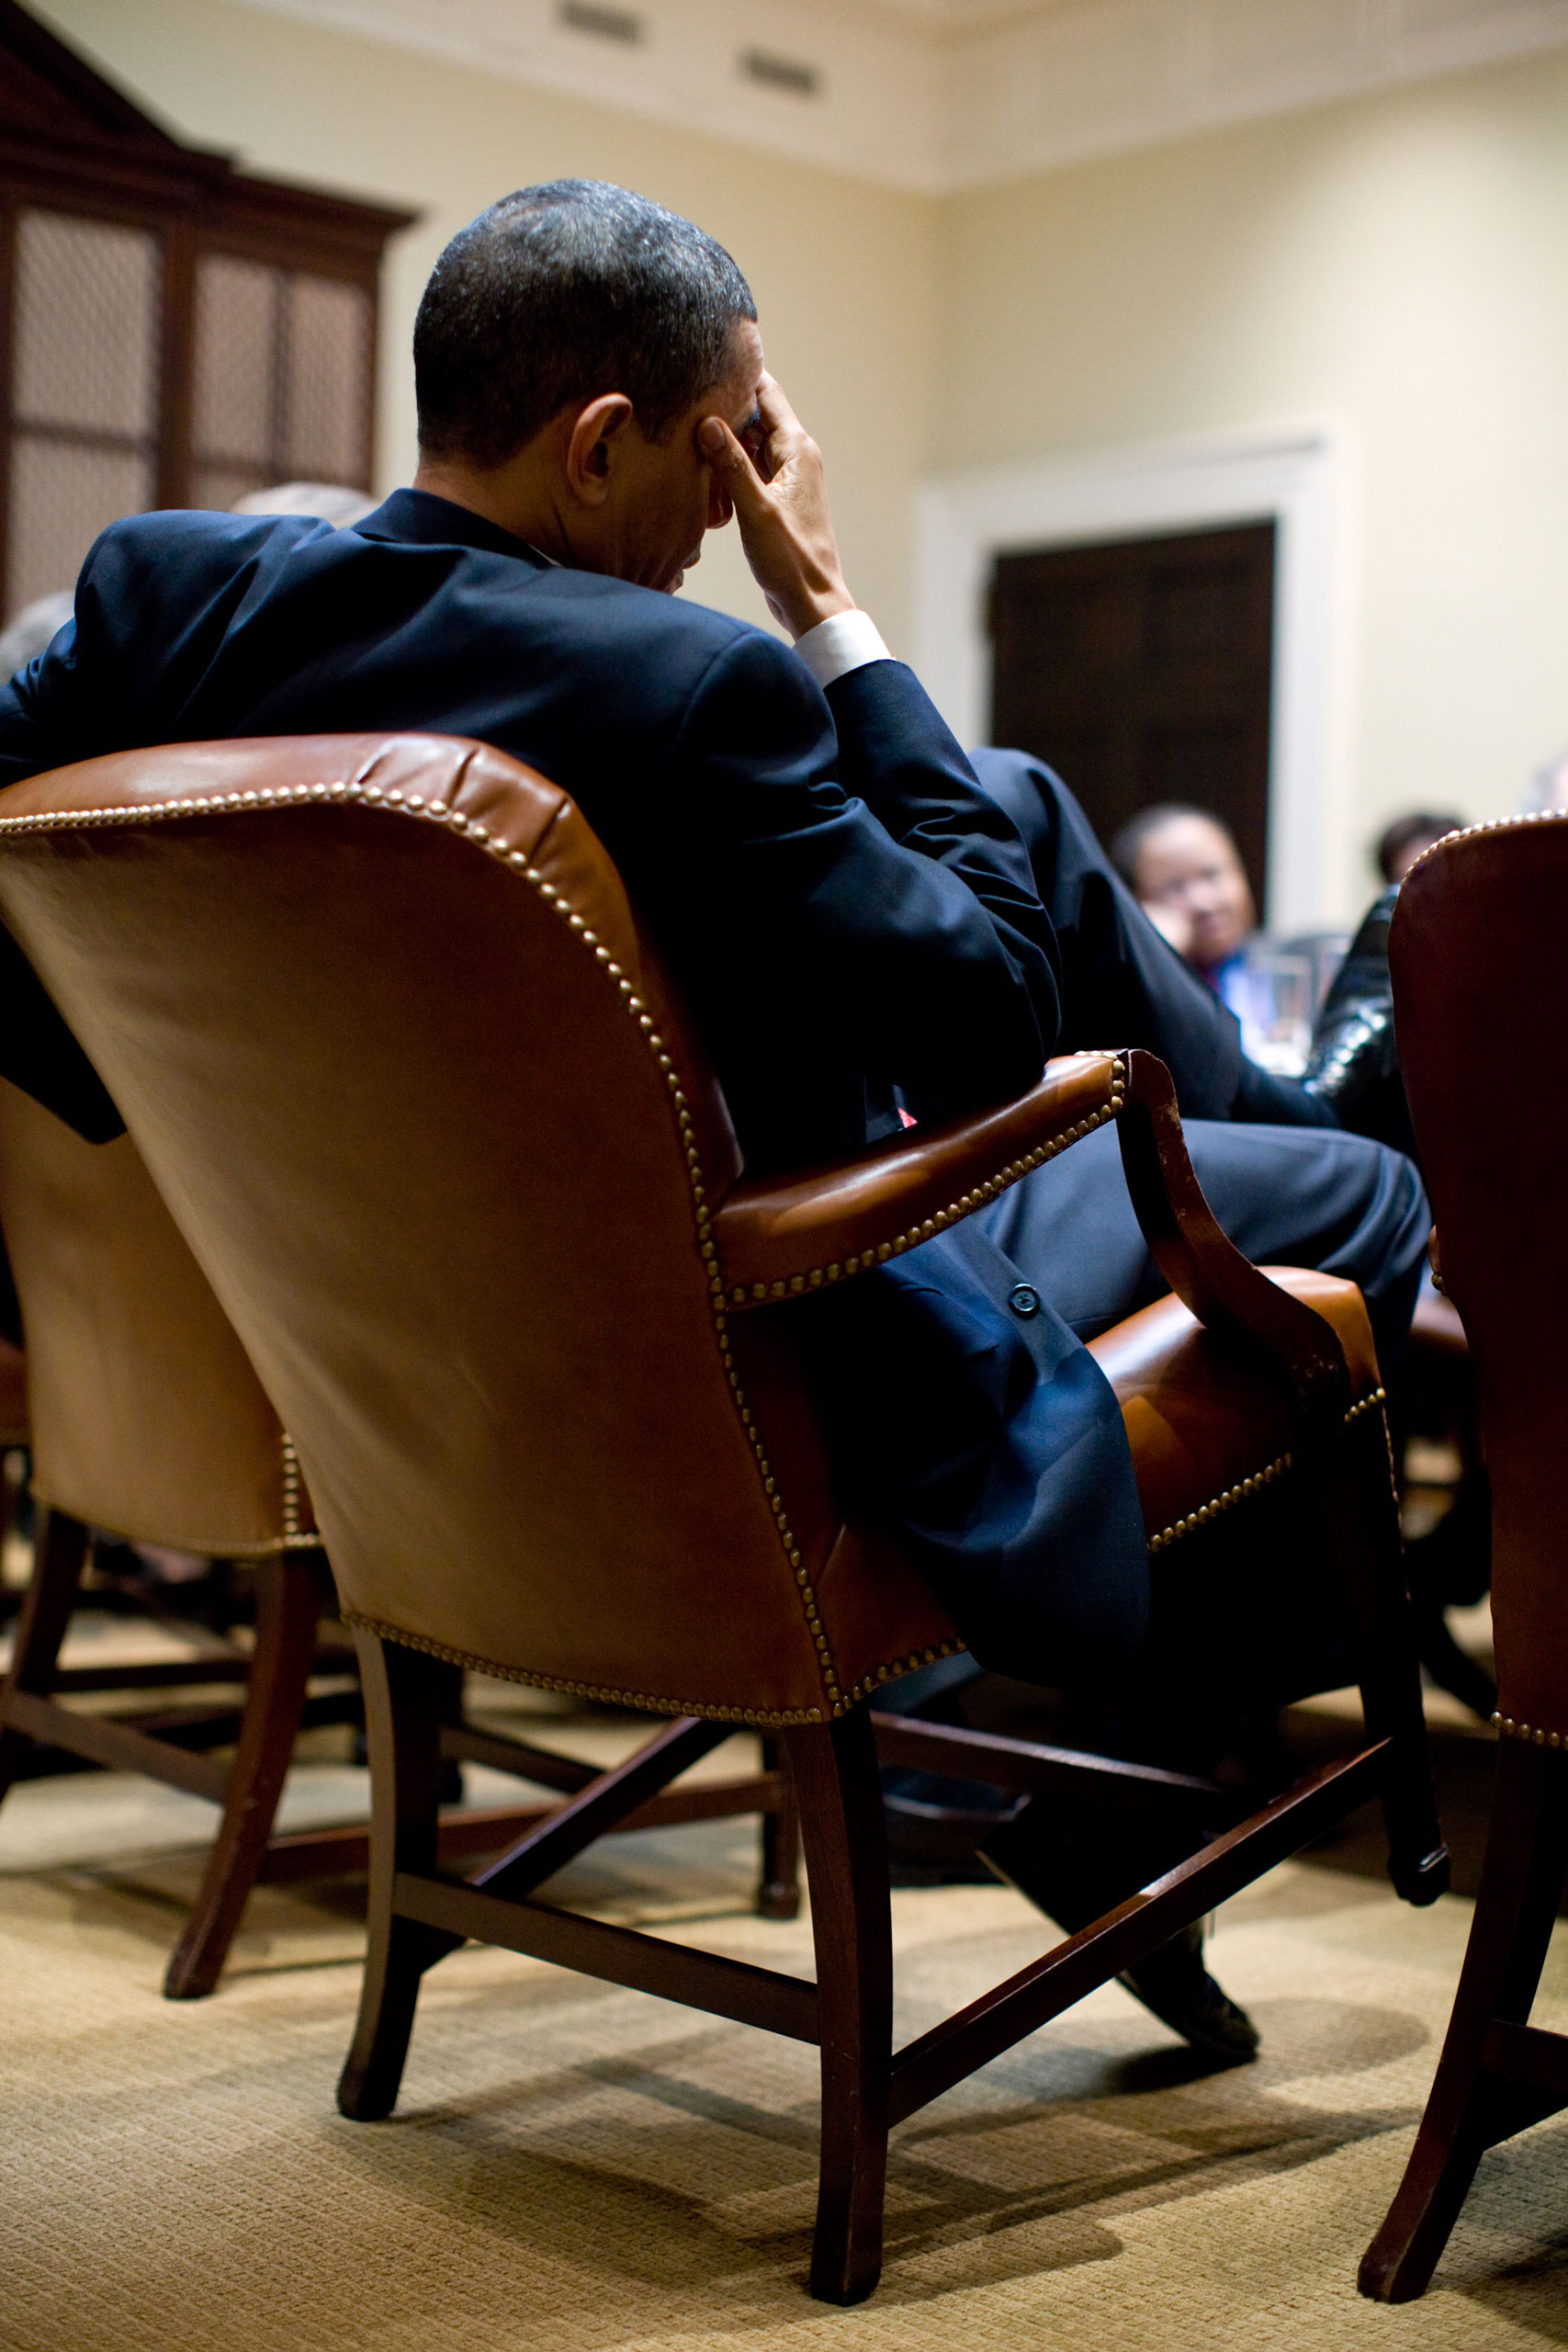 This was a planning meeting in the Roosevelt Room of the White House. The President was leaning back in his chair, taking in the discussion,”Dec. 22, 2009.